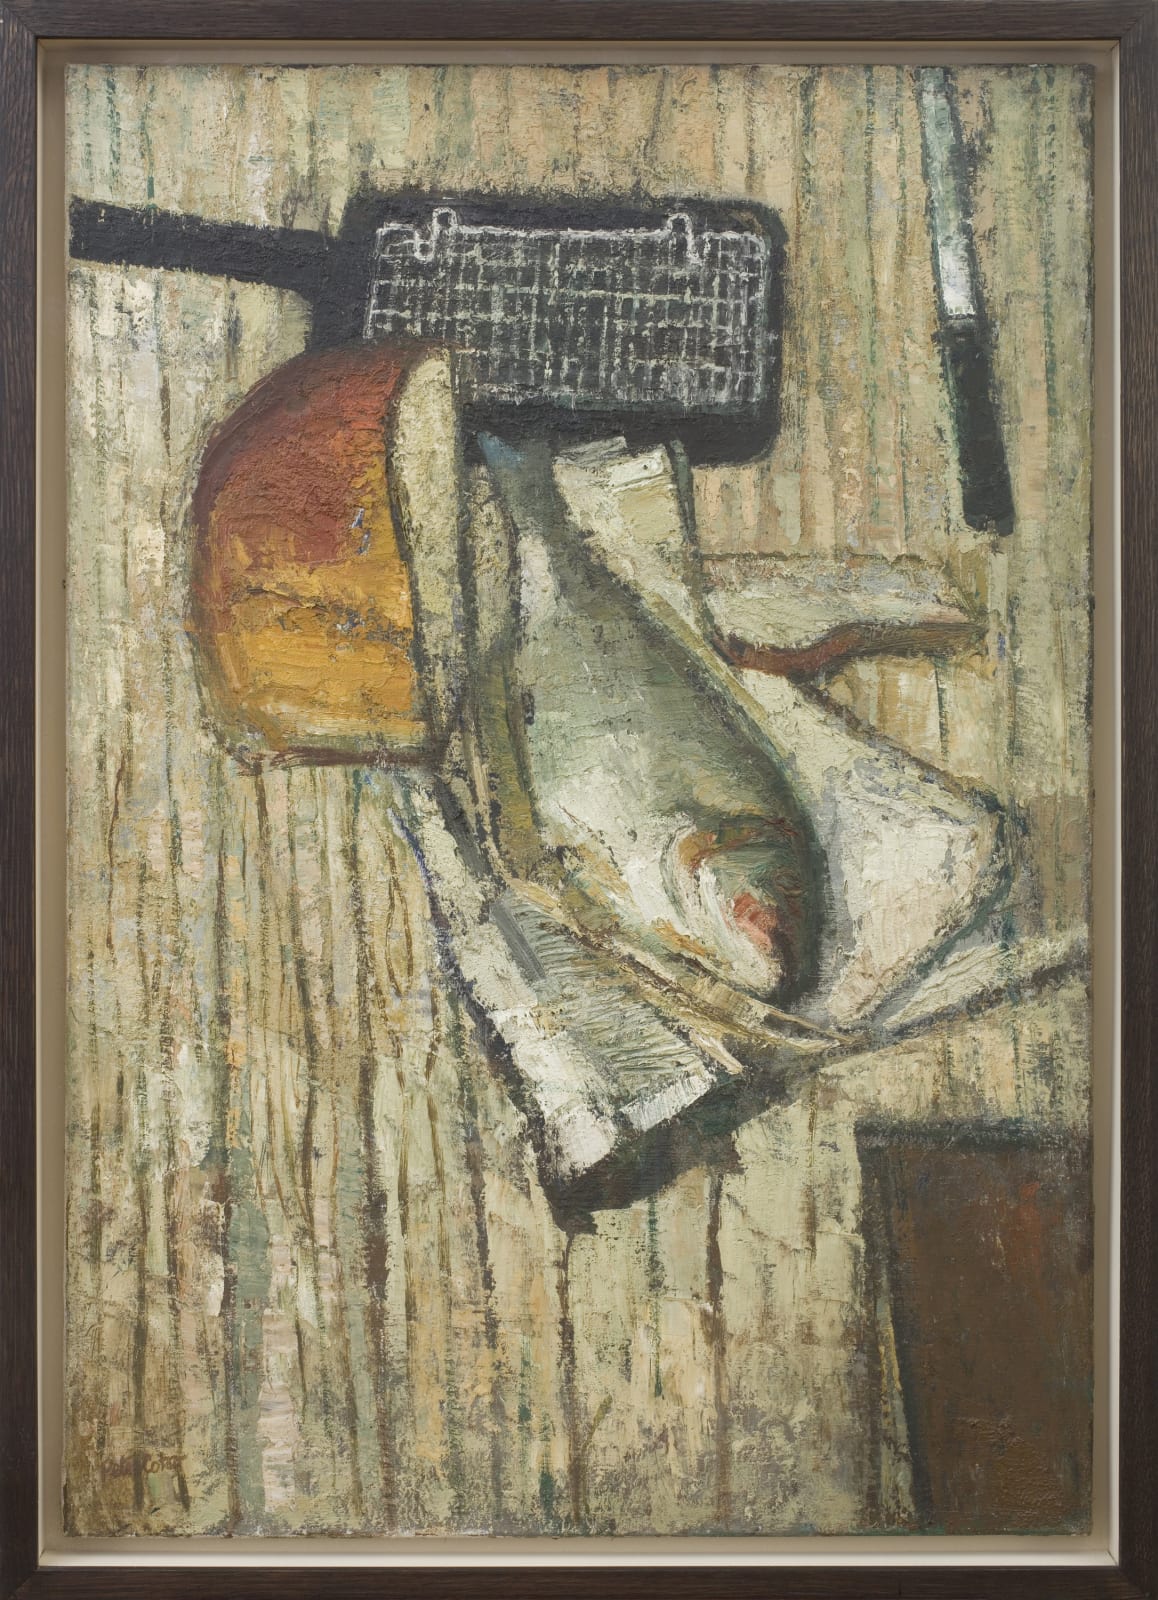 Peter Coker, Fish with Grill, 1954-55